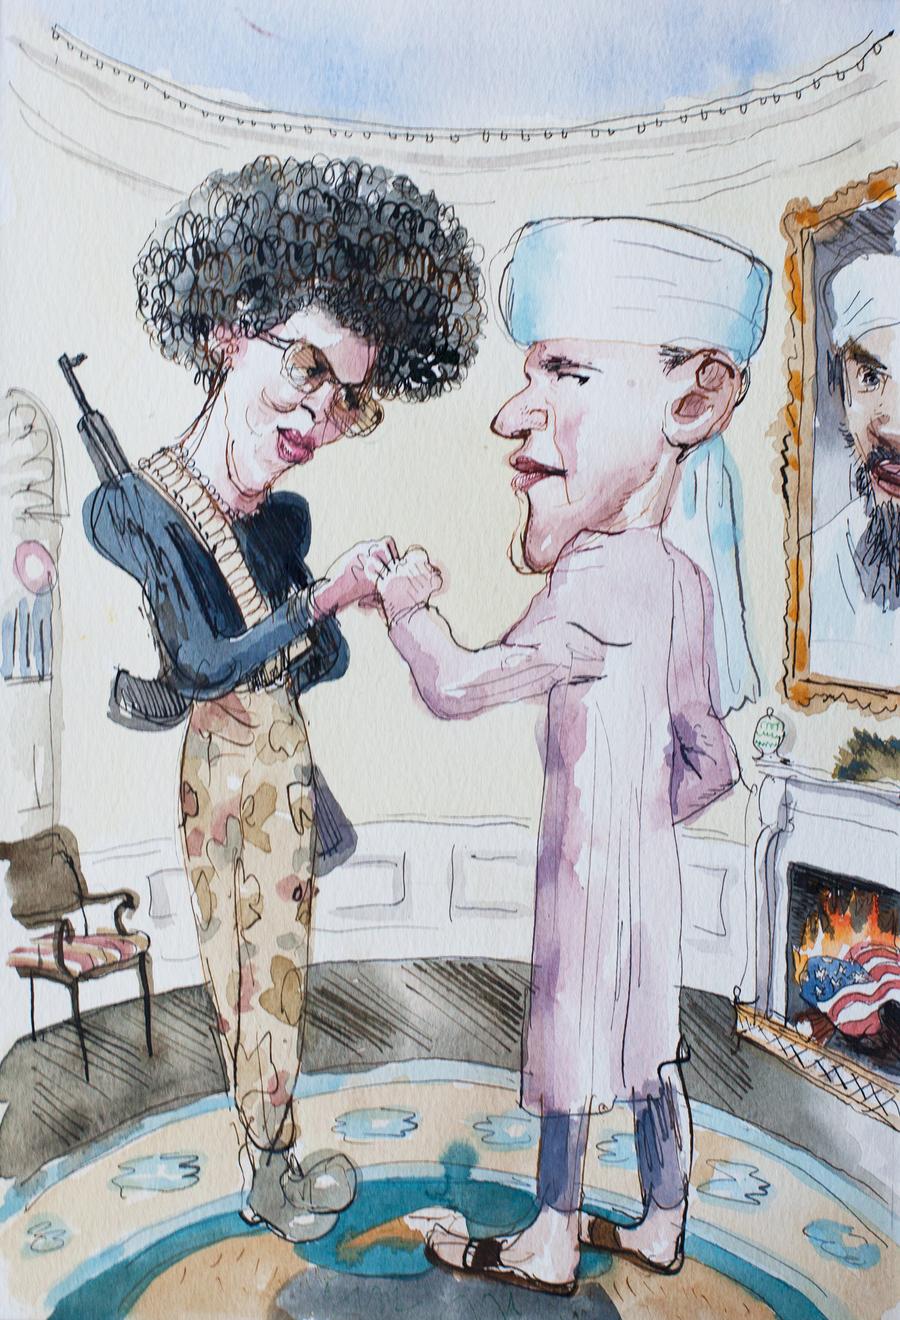 An early draft of Blitt’s controversial New Yorker cover “The Politics of Fear”